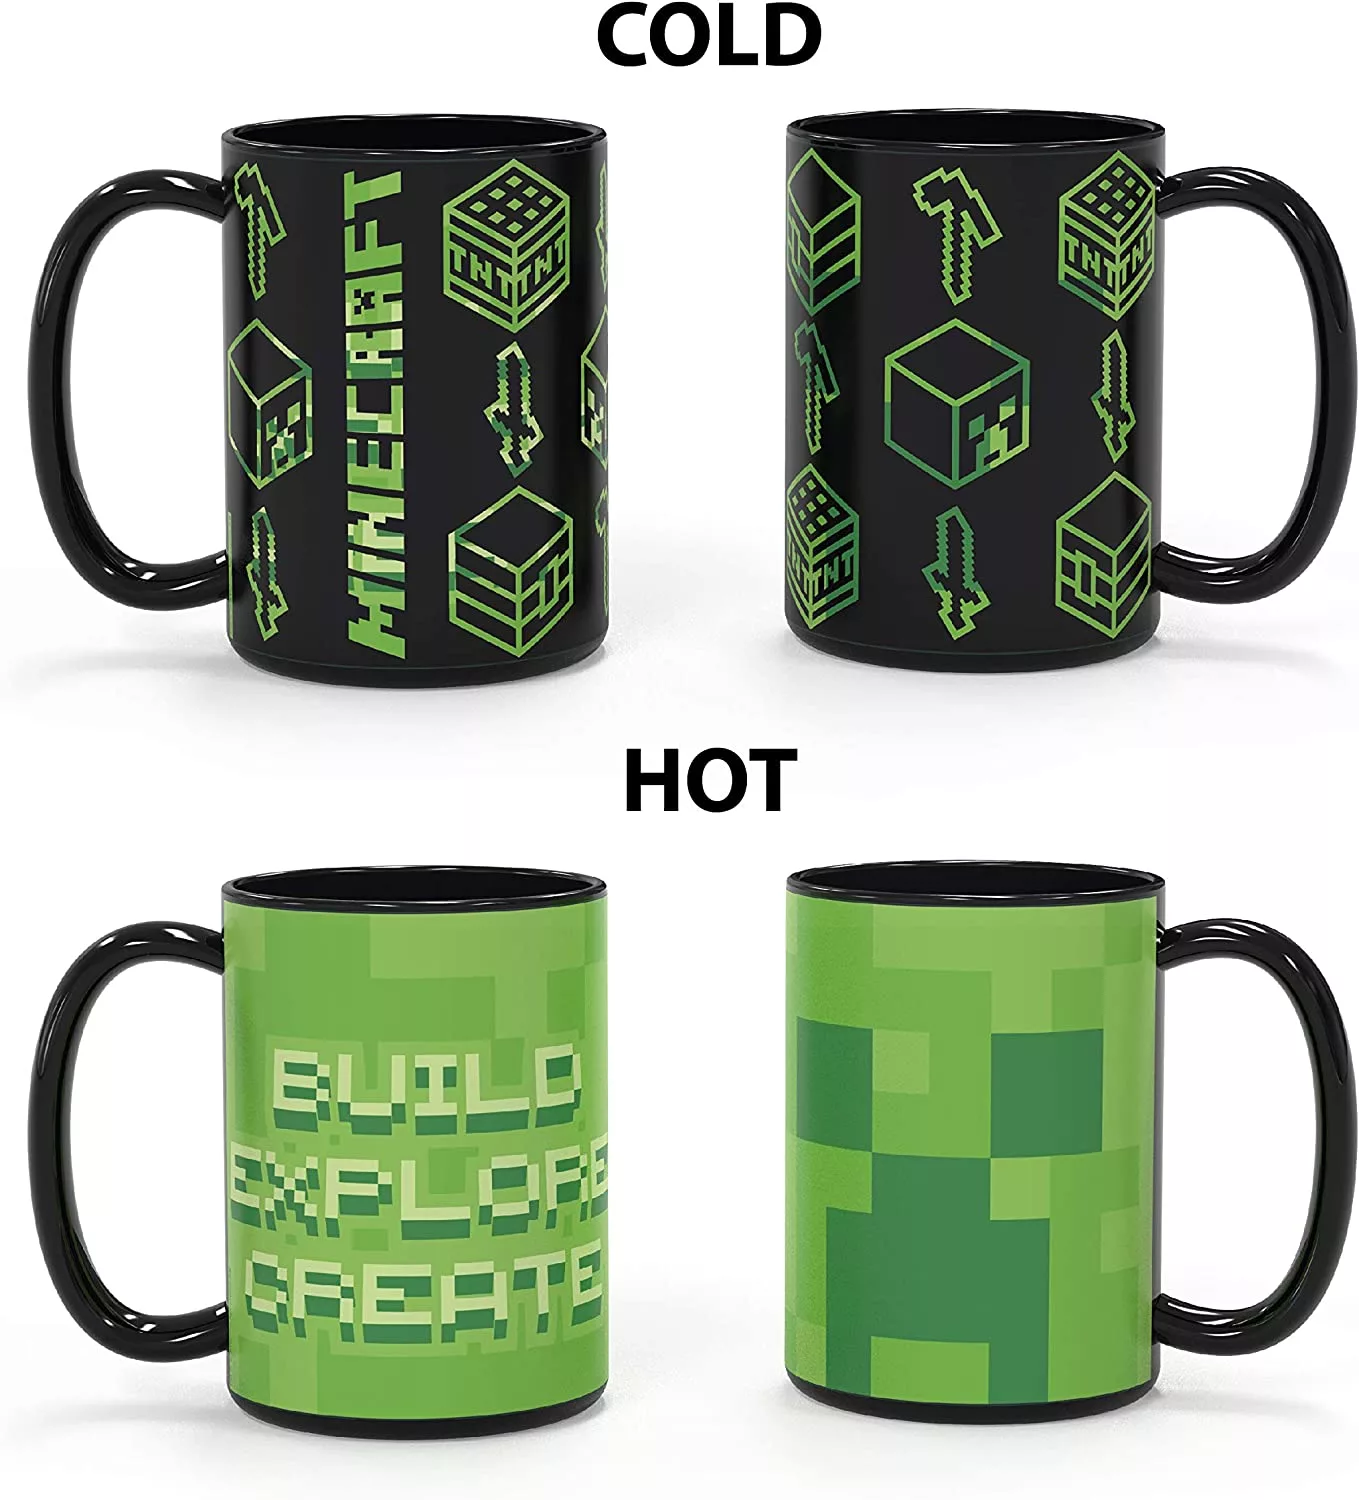 Minecraft Heat Changing Mug Comparing Cold to Hot